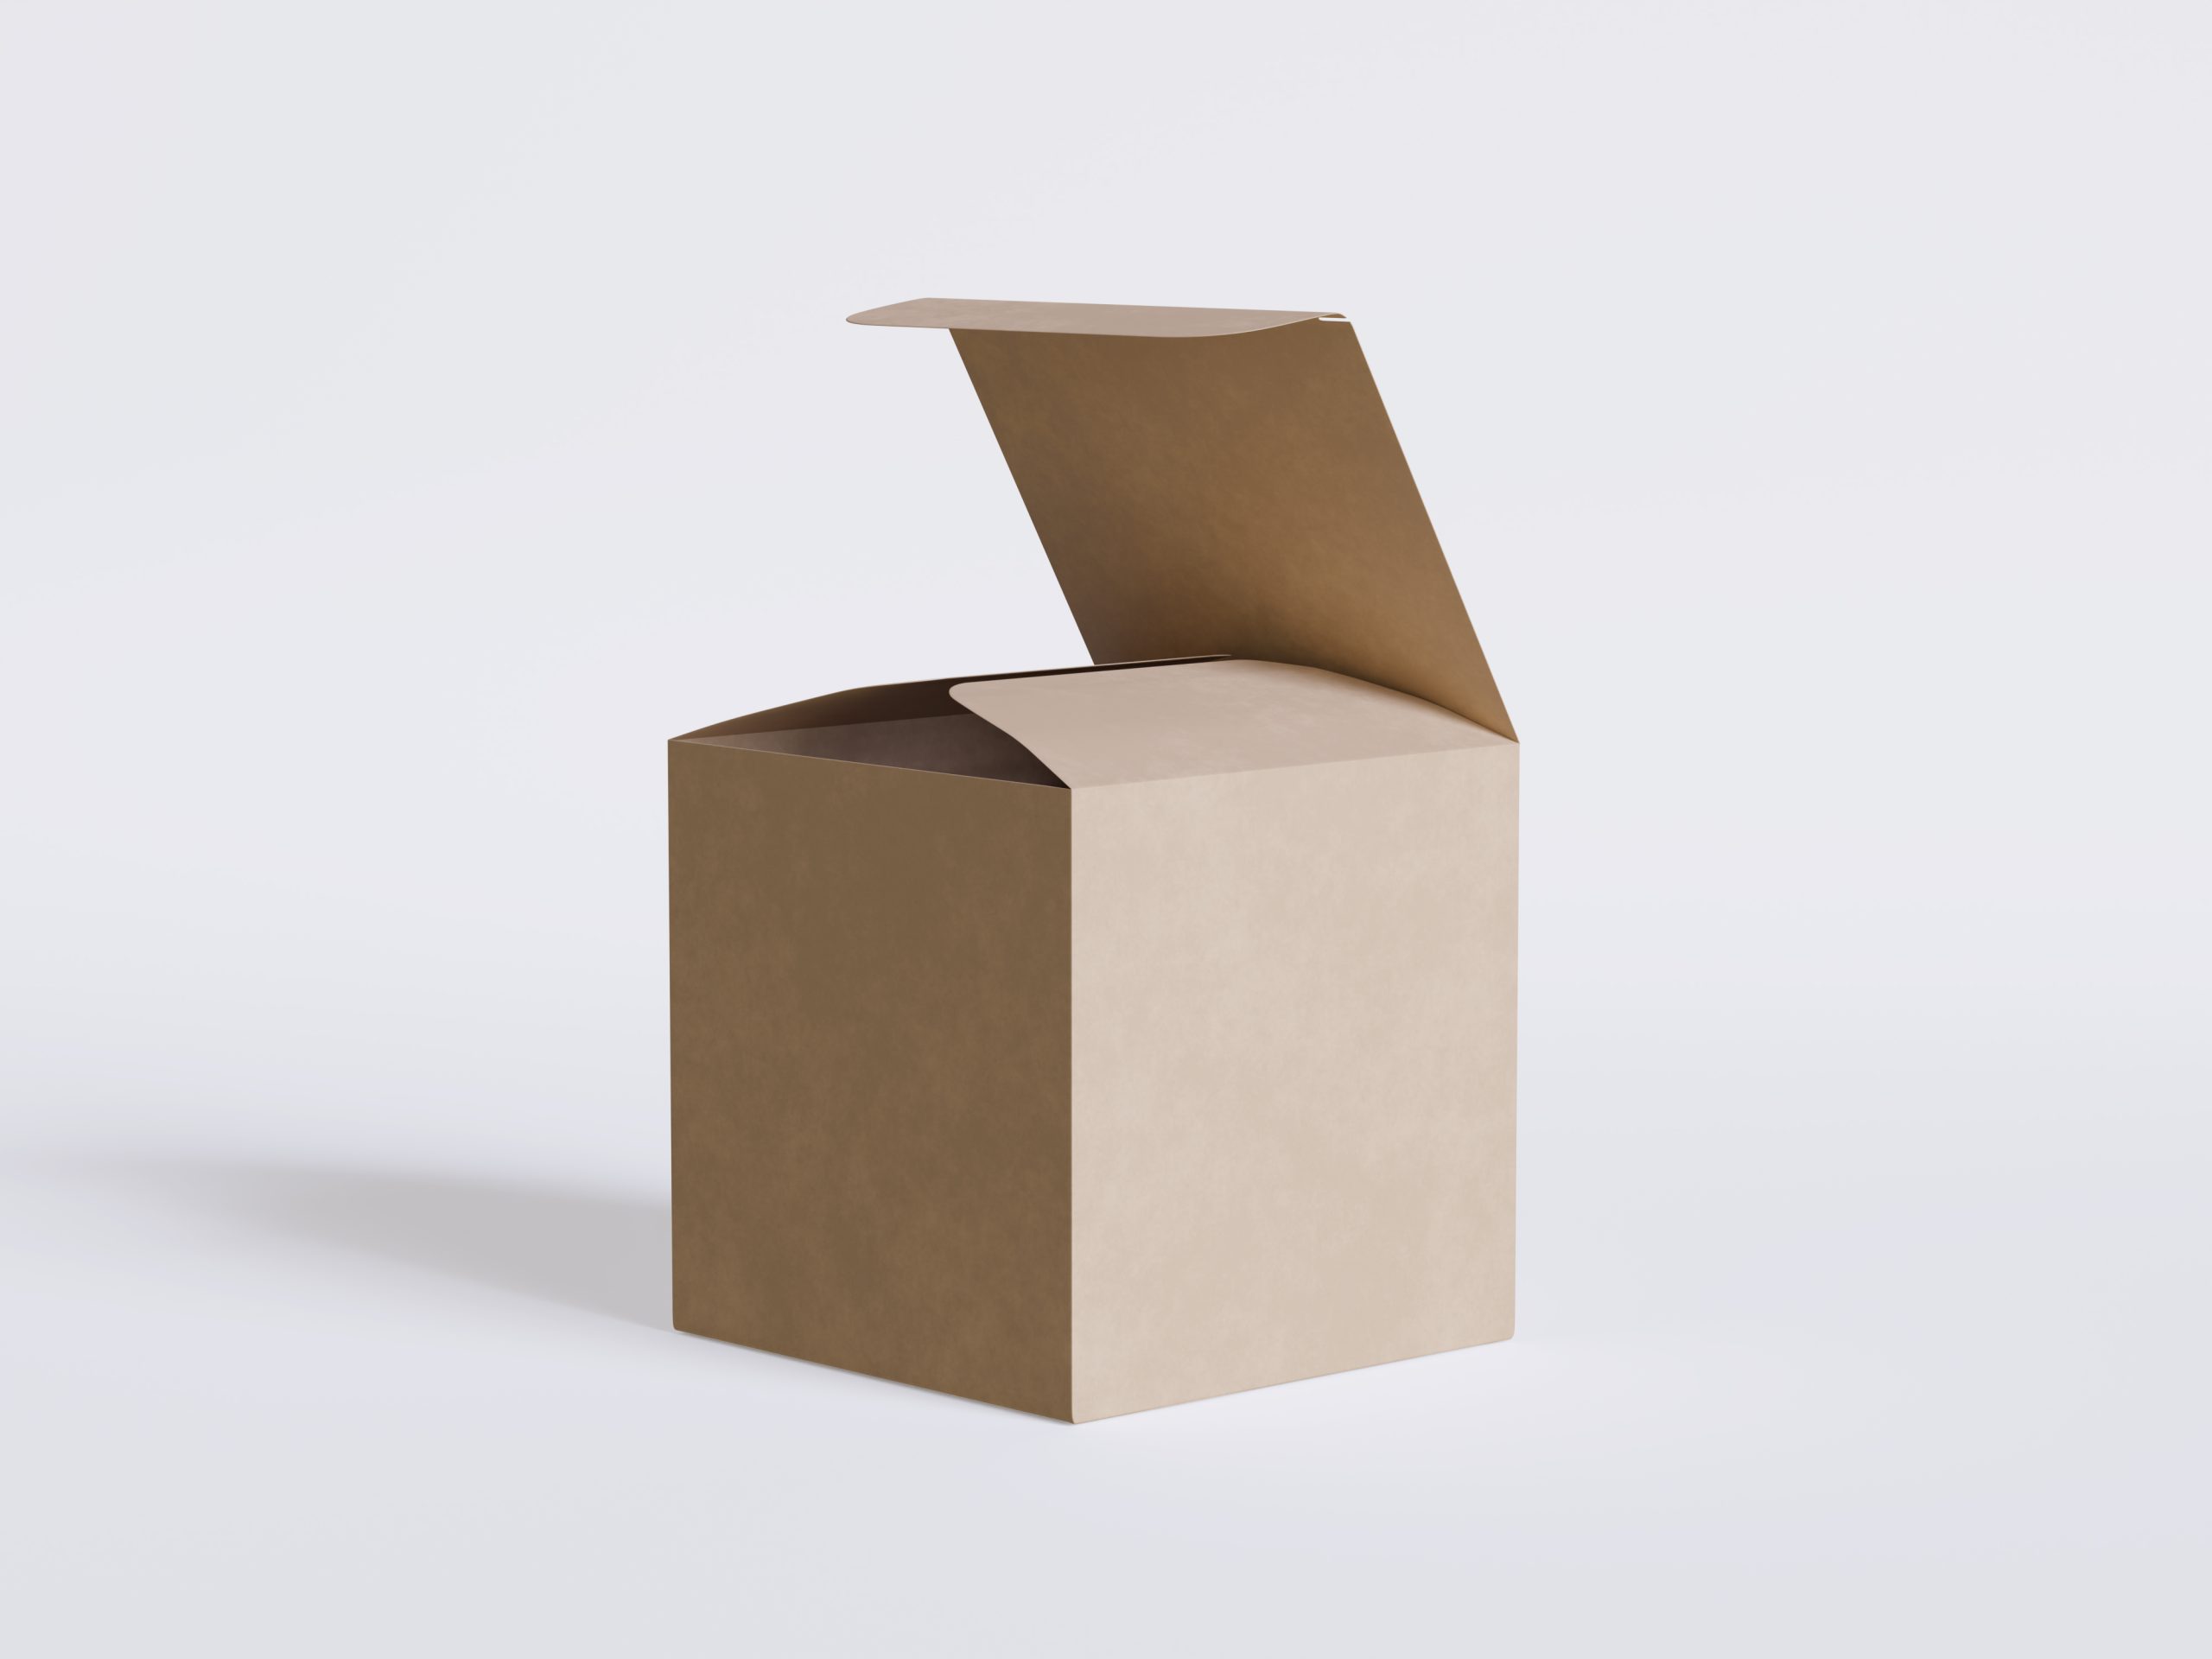 vecteezy_square-box-packaging-white-backgrounnd-cardboard-paper-with_34730436